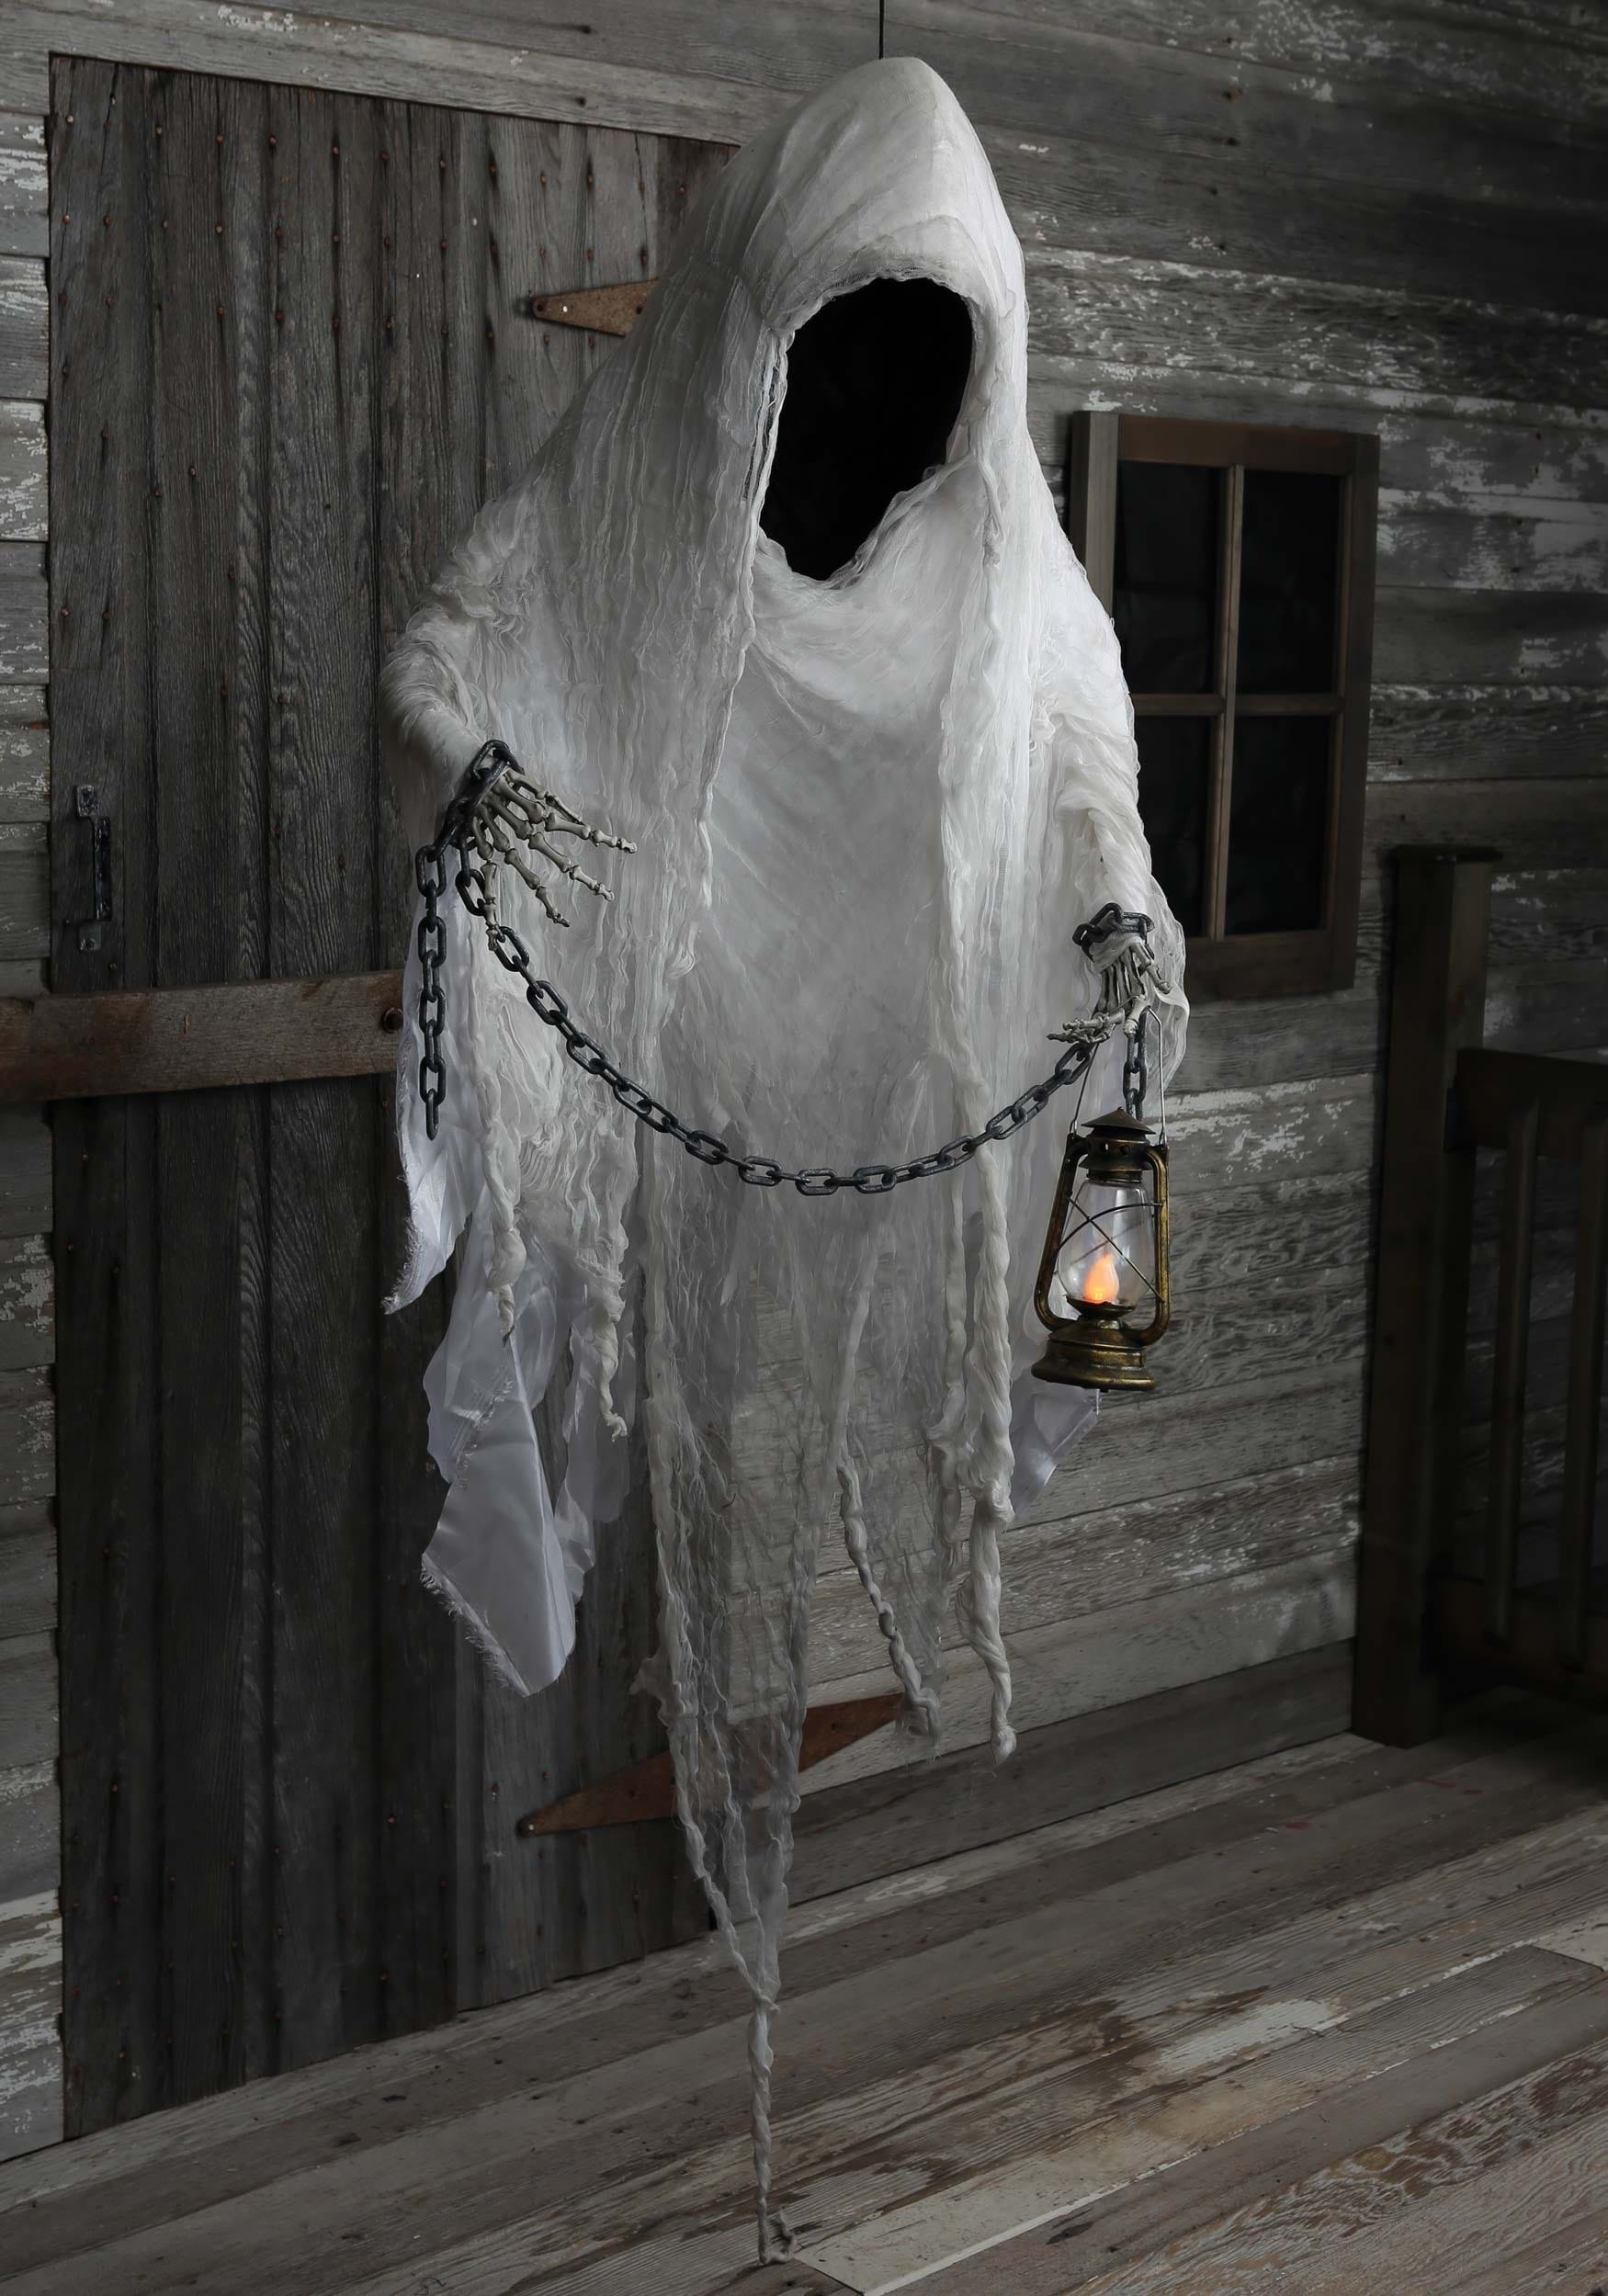 Anyone have a good method for hanging up their ghost face mask? I